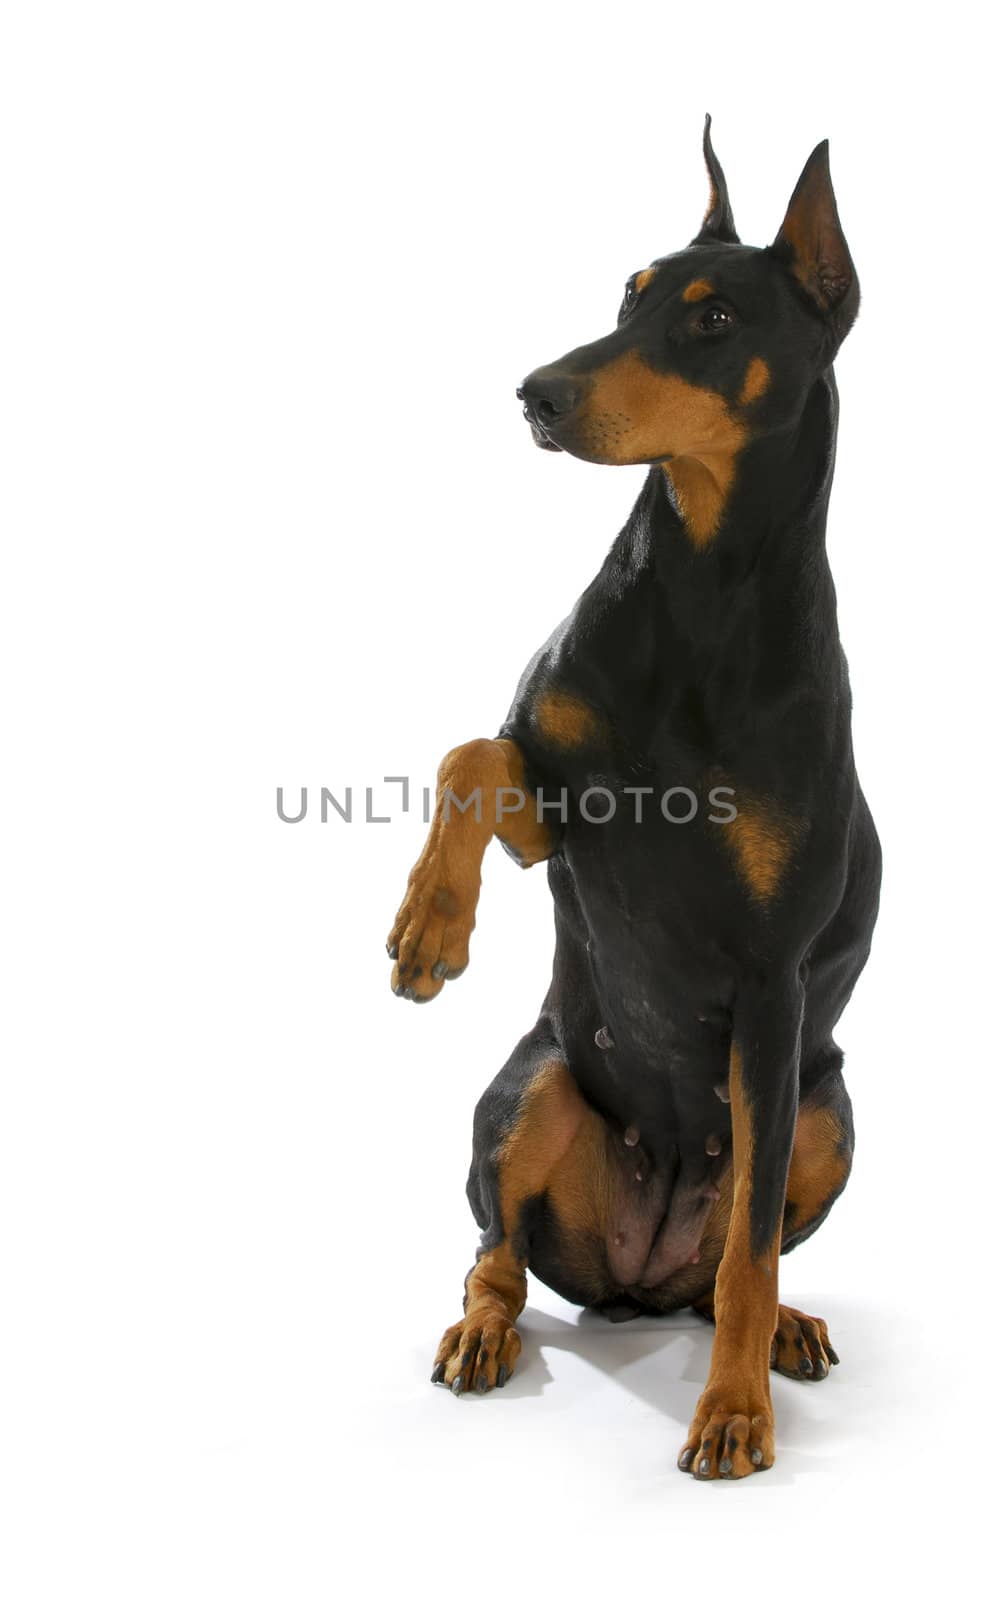 shake a paw - doberman pinscher with paw held up ready to shake a paw on white background